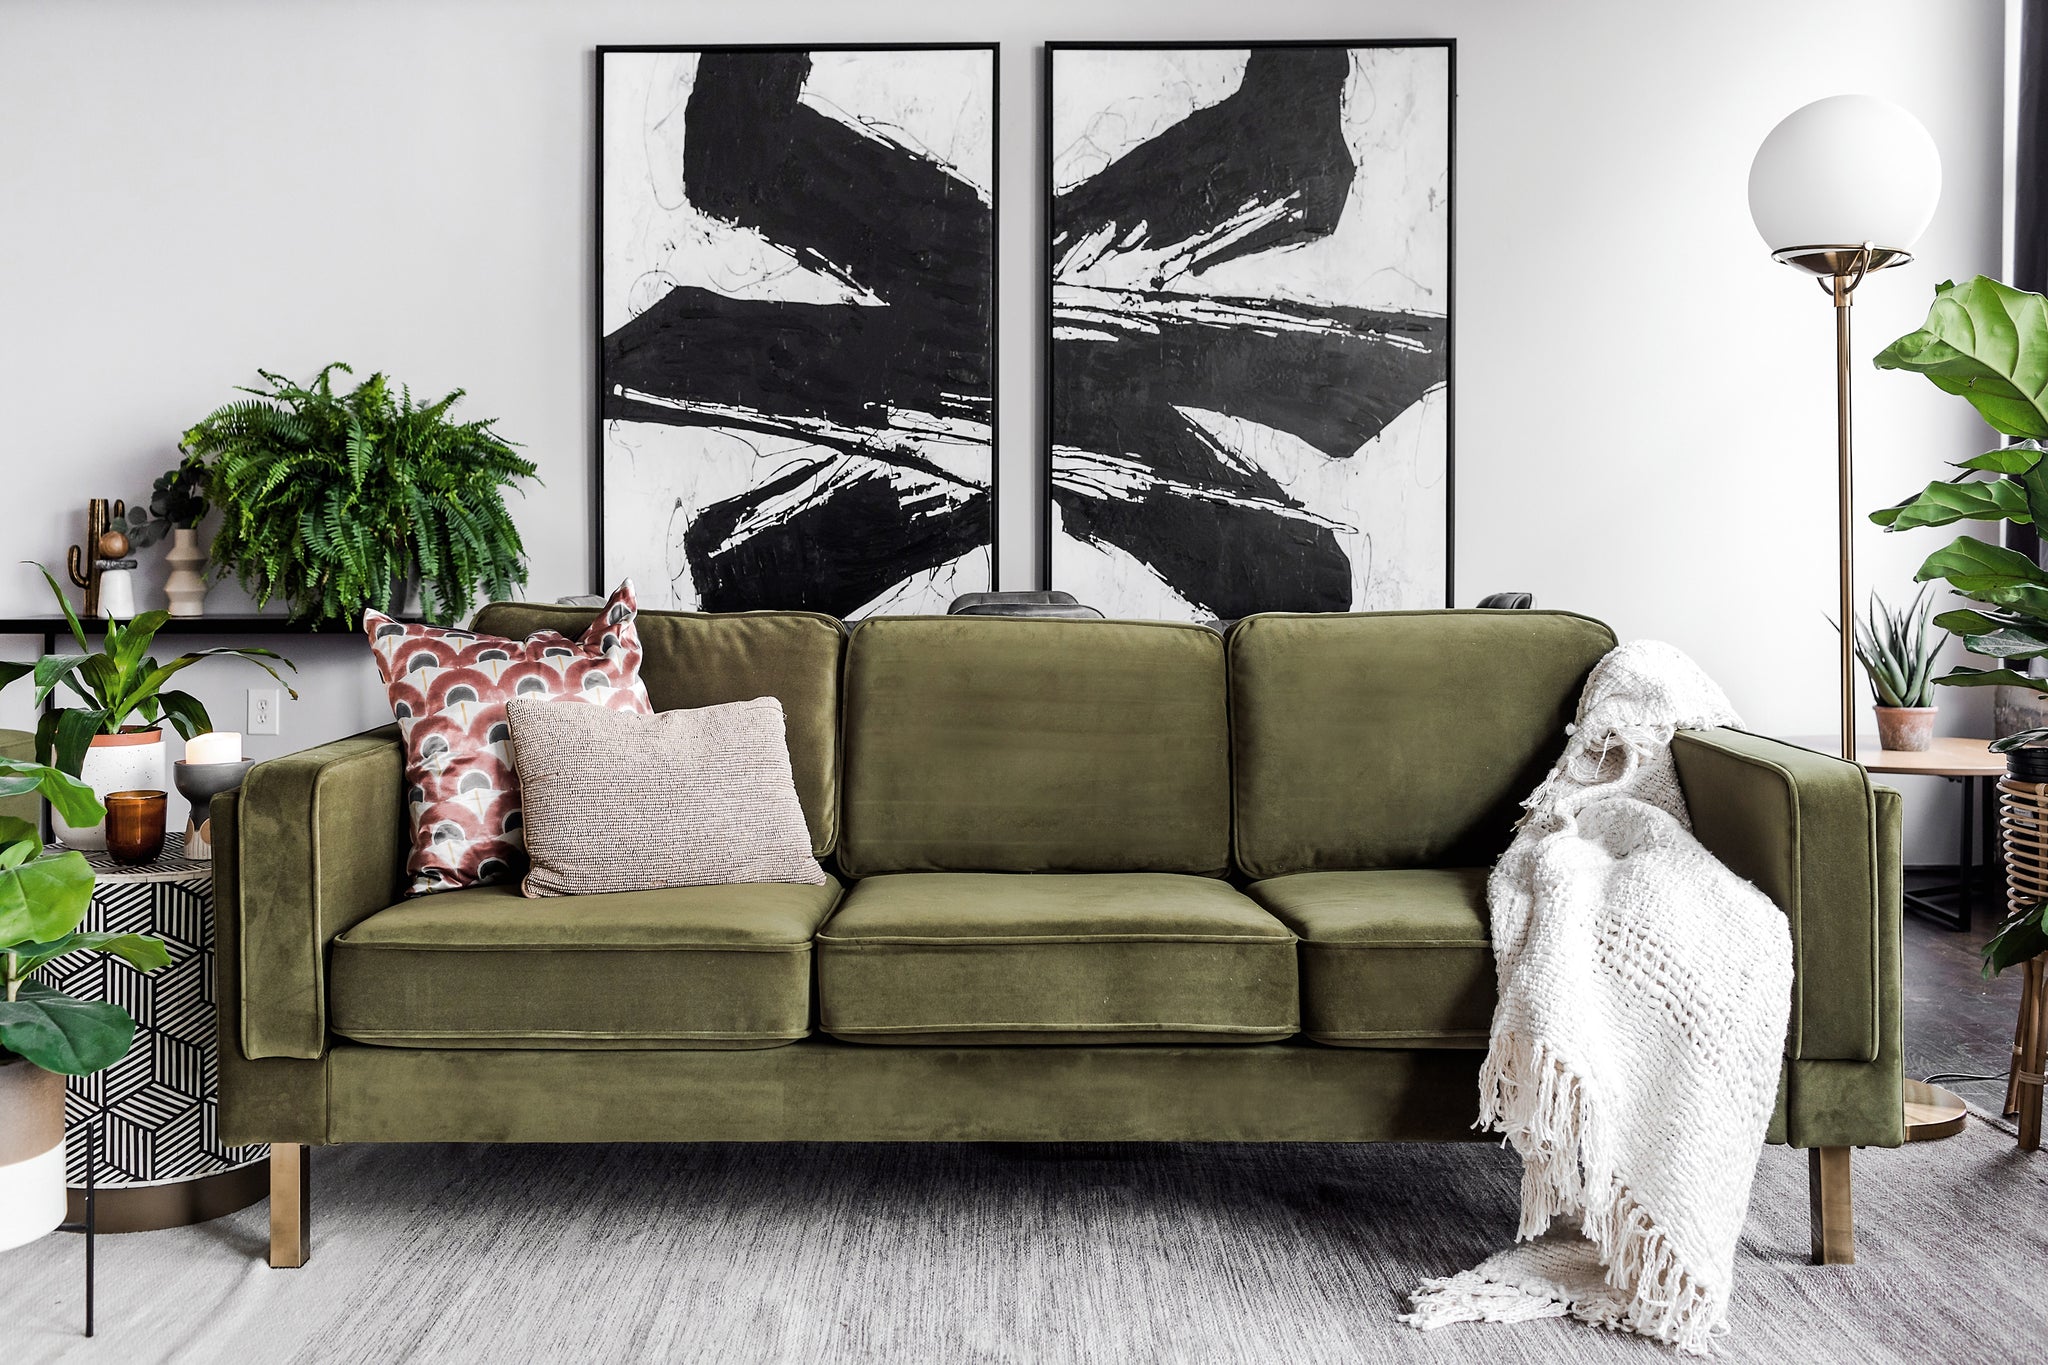 albany sofa shown in olive velvet with gold legs